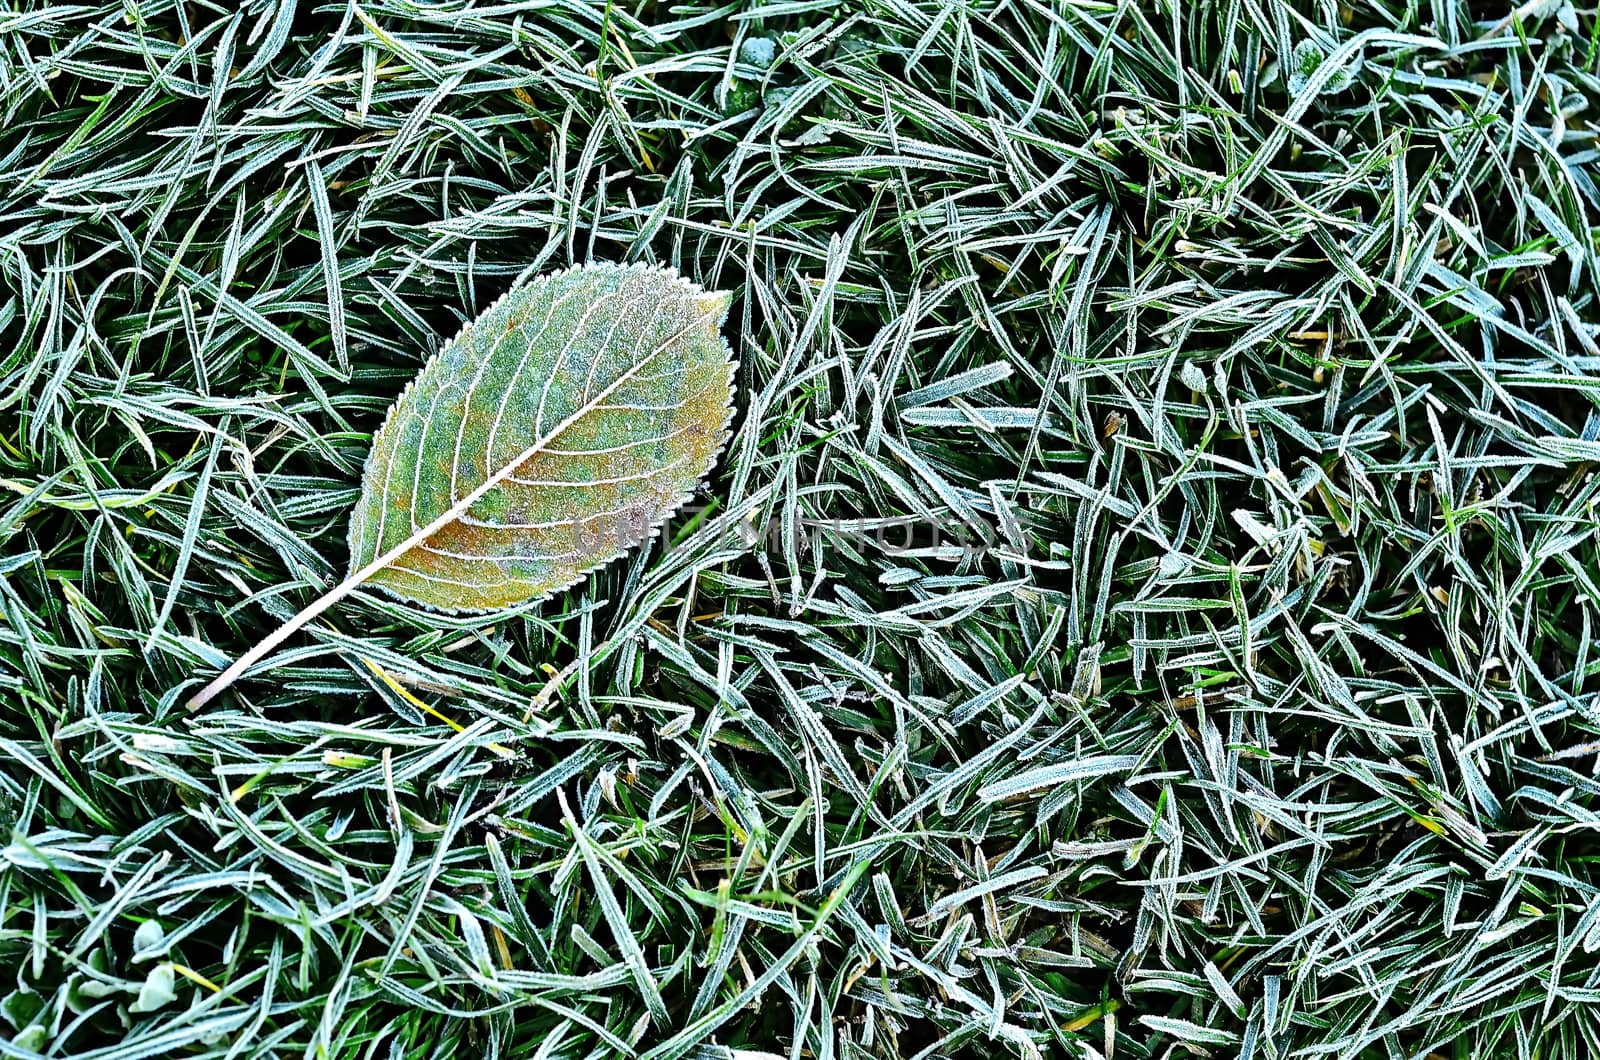 Fallen leaf on the grass with frost.